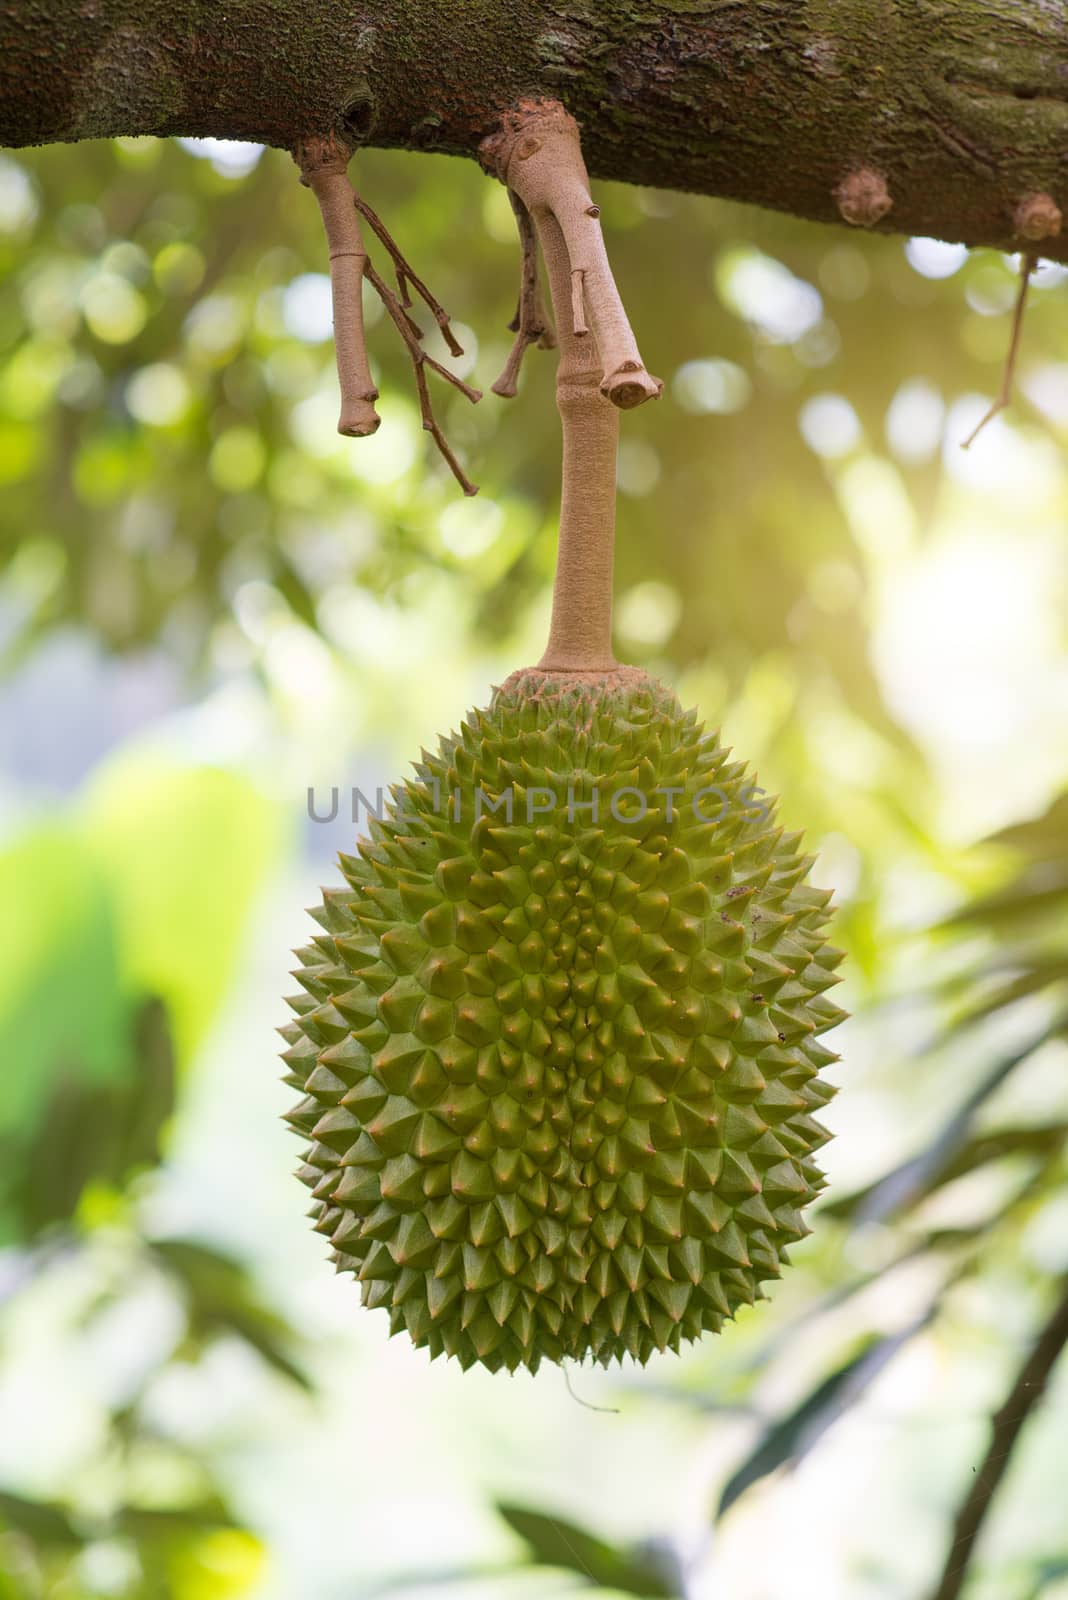 Fresh tropical fruit musang king durian on tree in orchard.